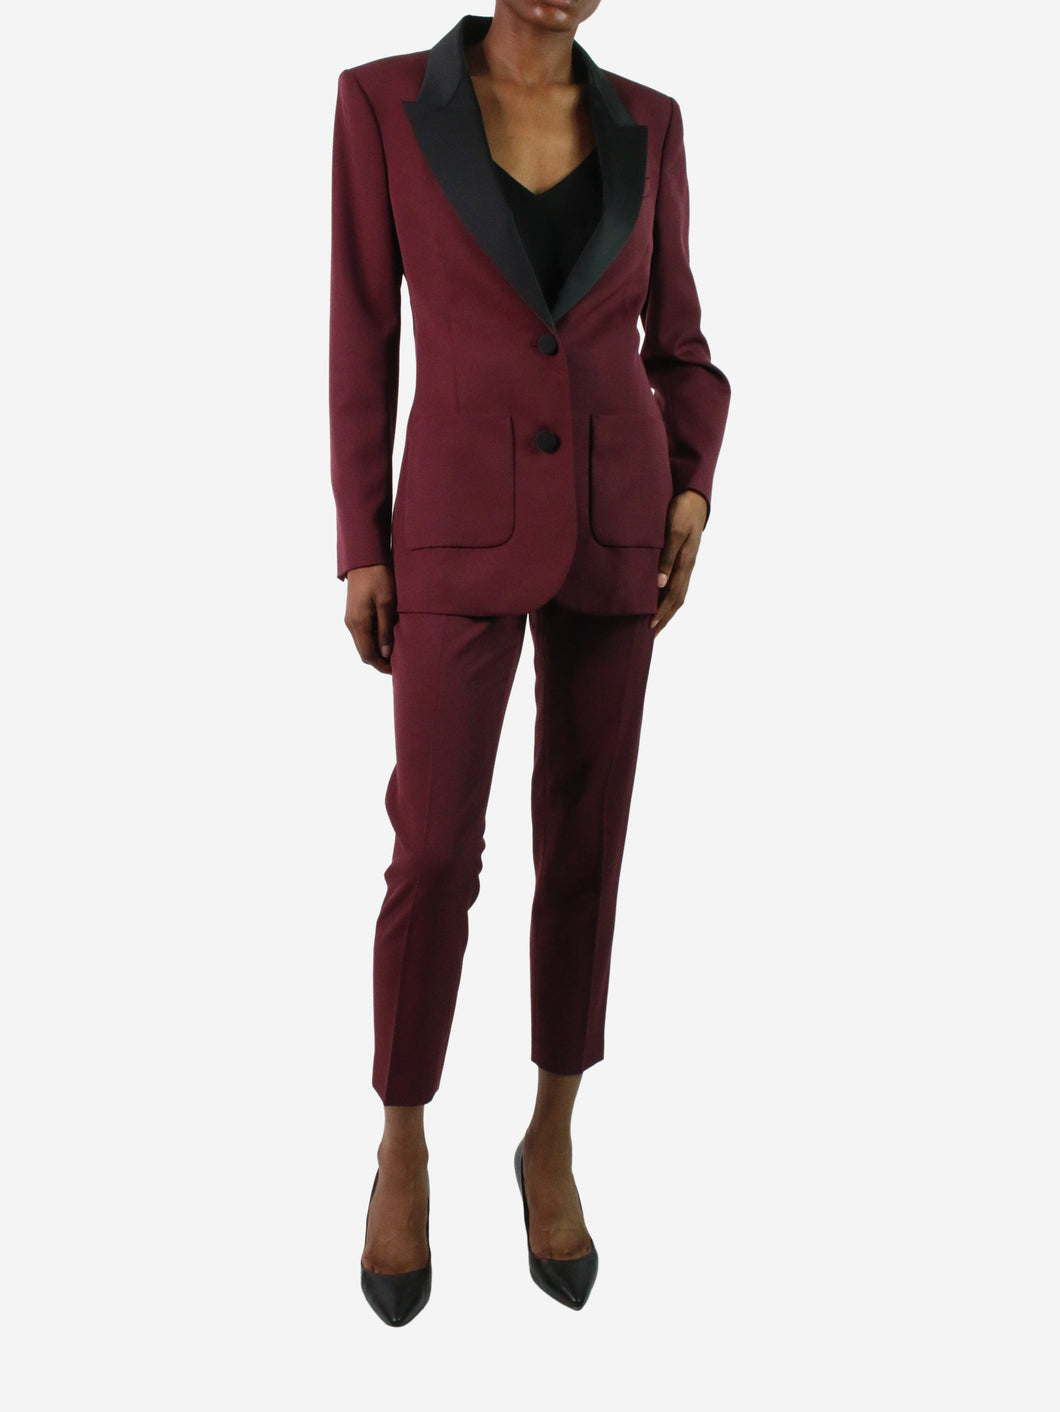 Red blazer and trousers suit set - size UK 6 Suits Racil 